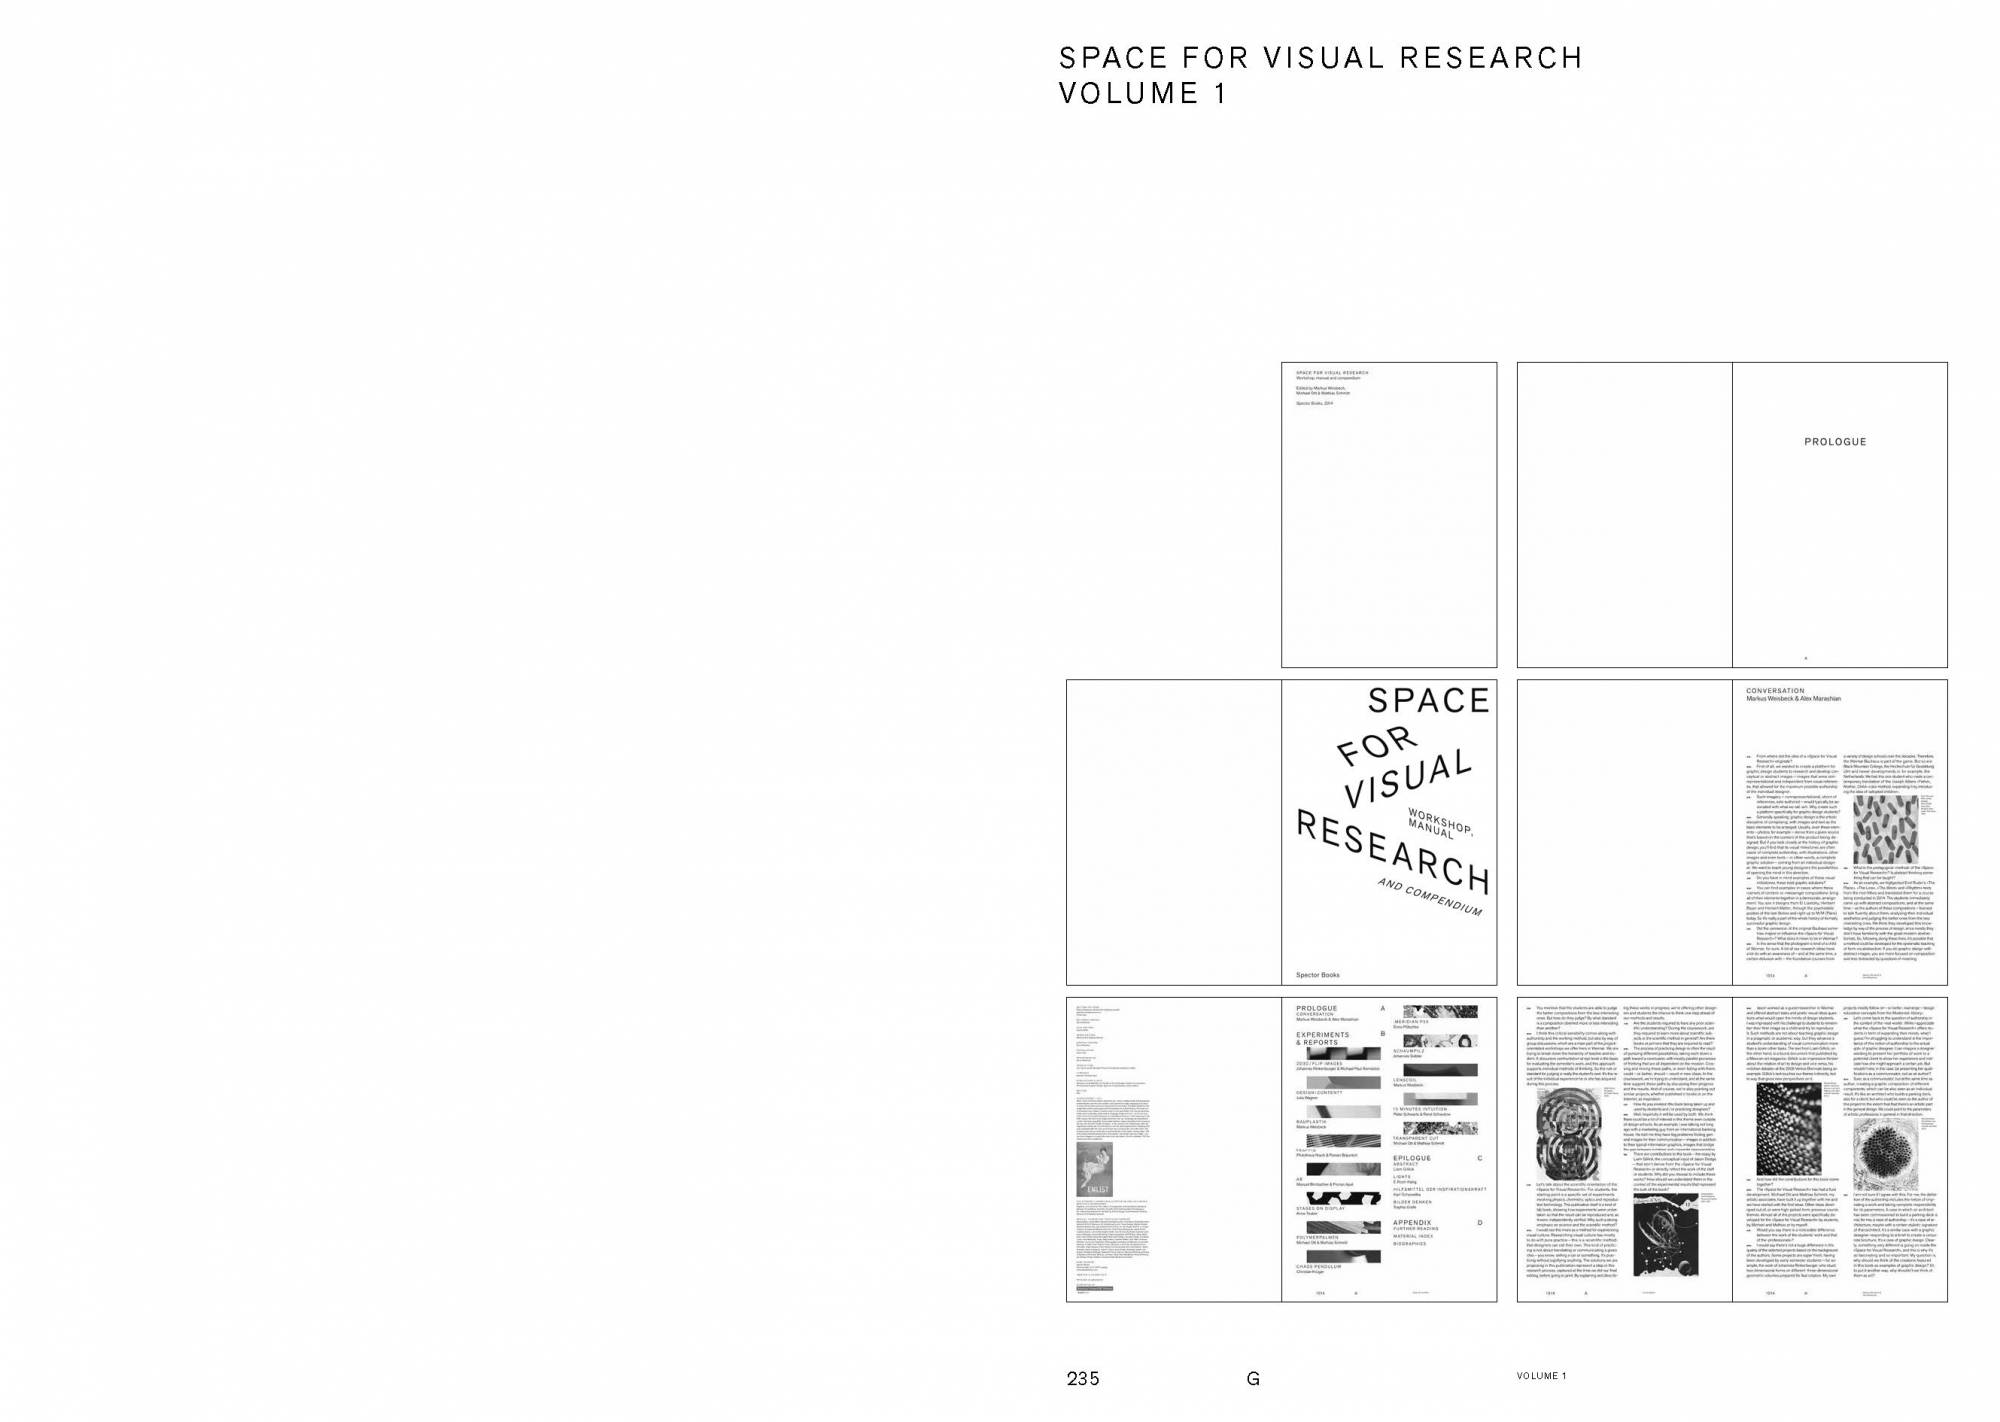 Space for Visual Research 2